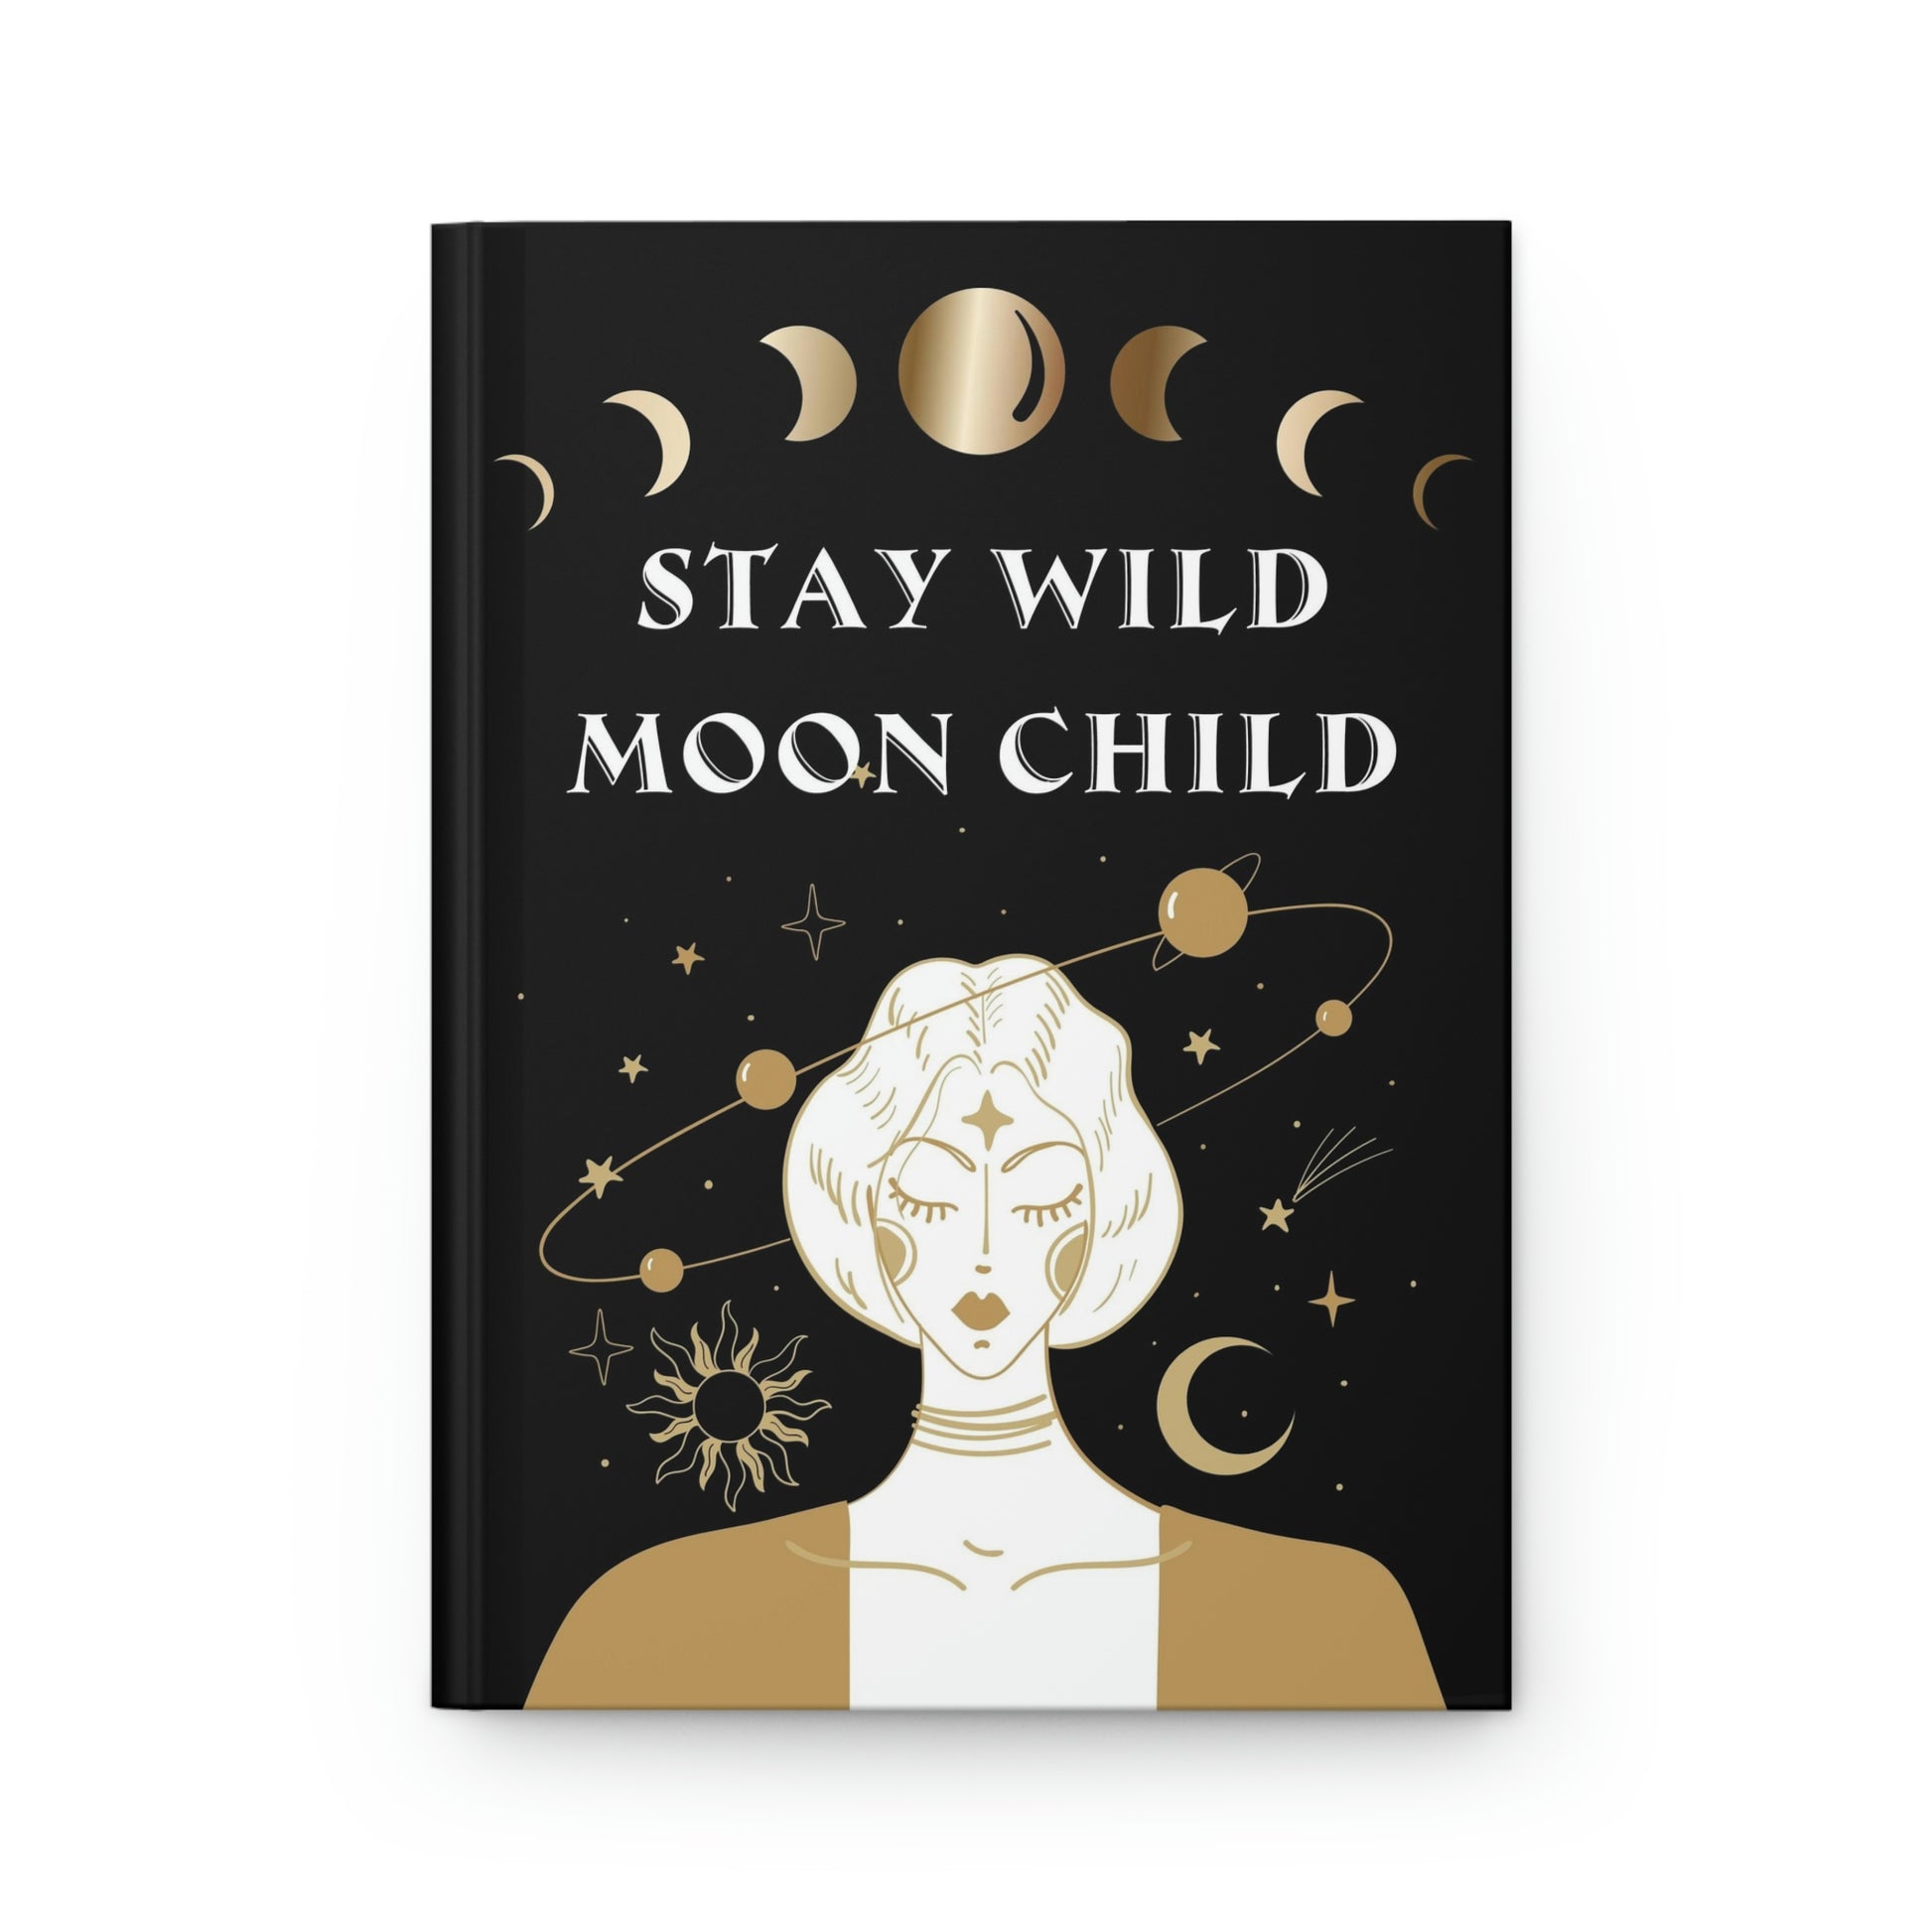 Wicca Journal Stay wild moon child Notebook-MoonChildWorld